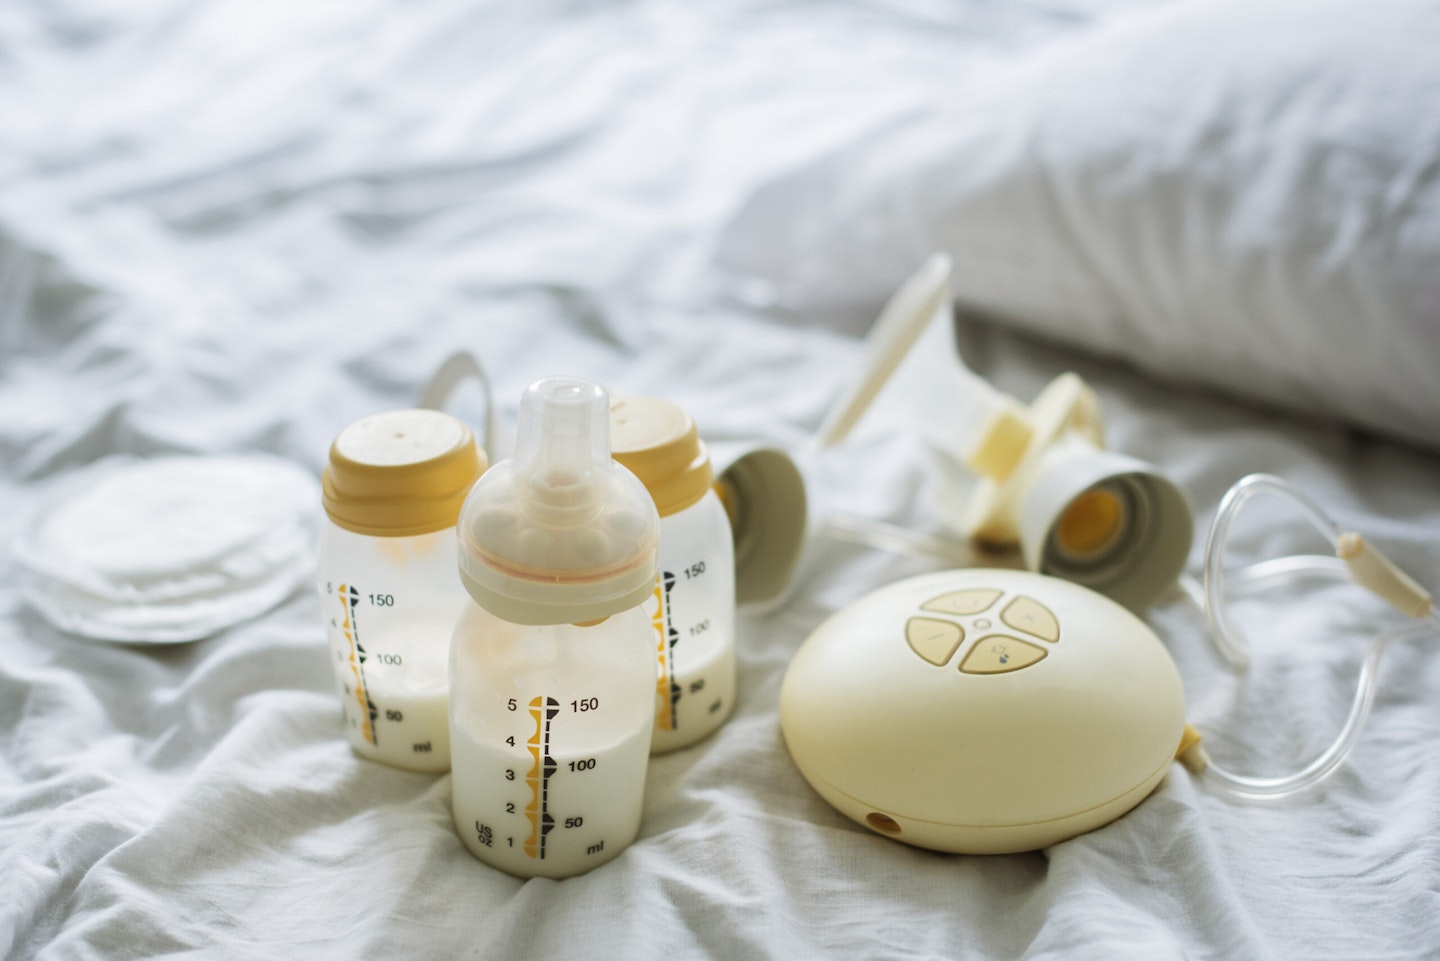 Best breast pumps: An electric breast pump on a bed